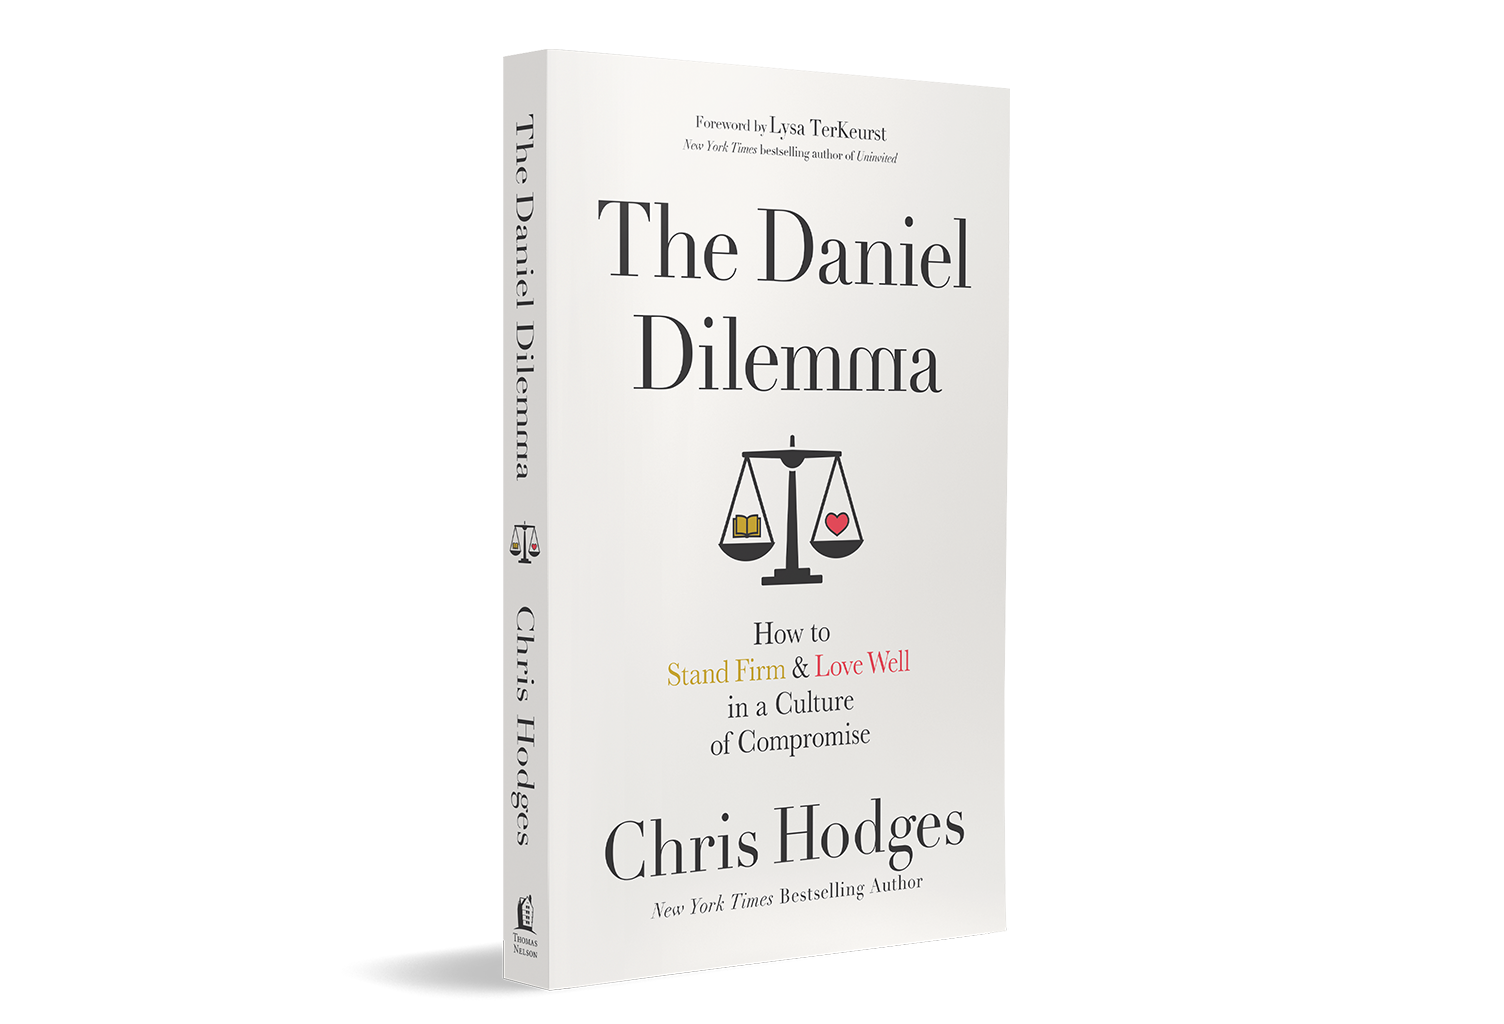 The Daniel Dilemma by Chris Hodges by TBN